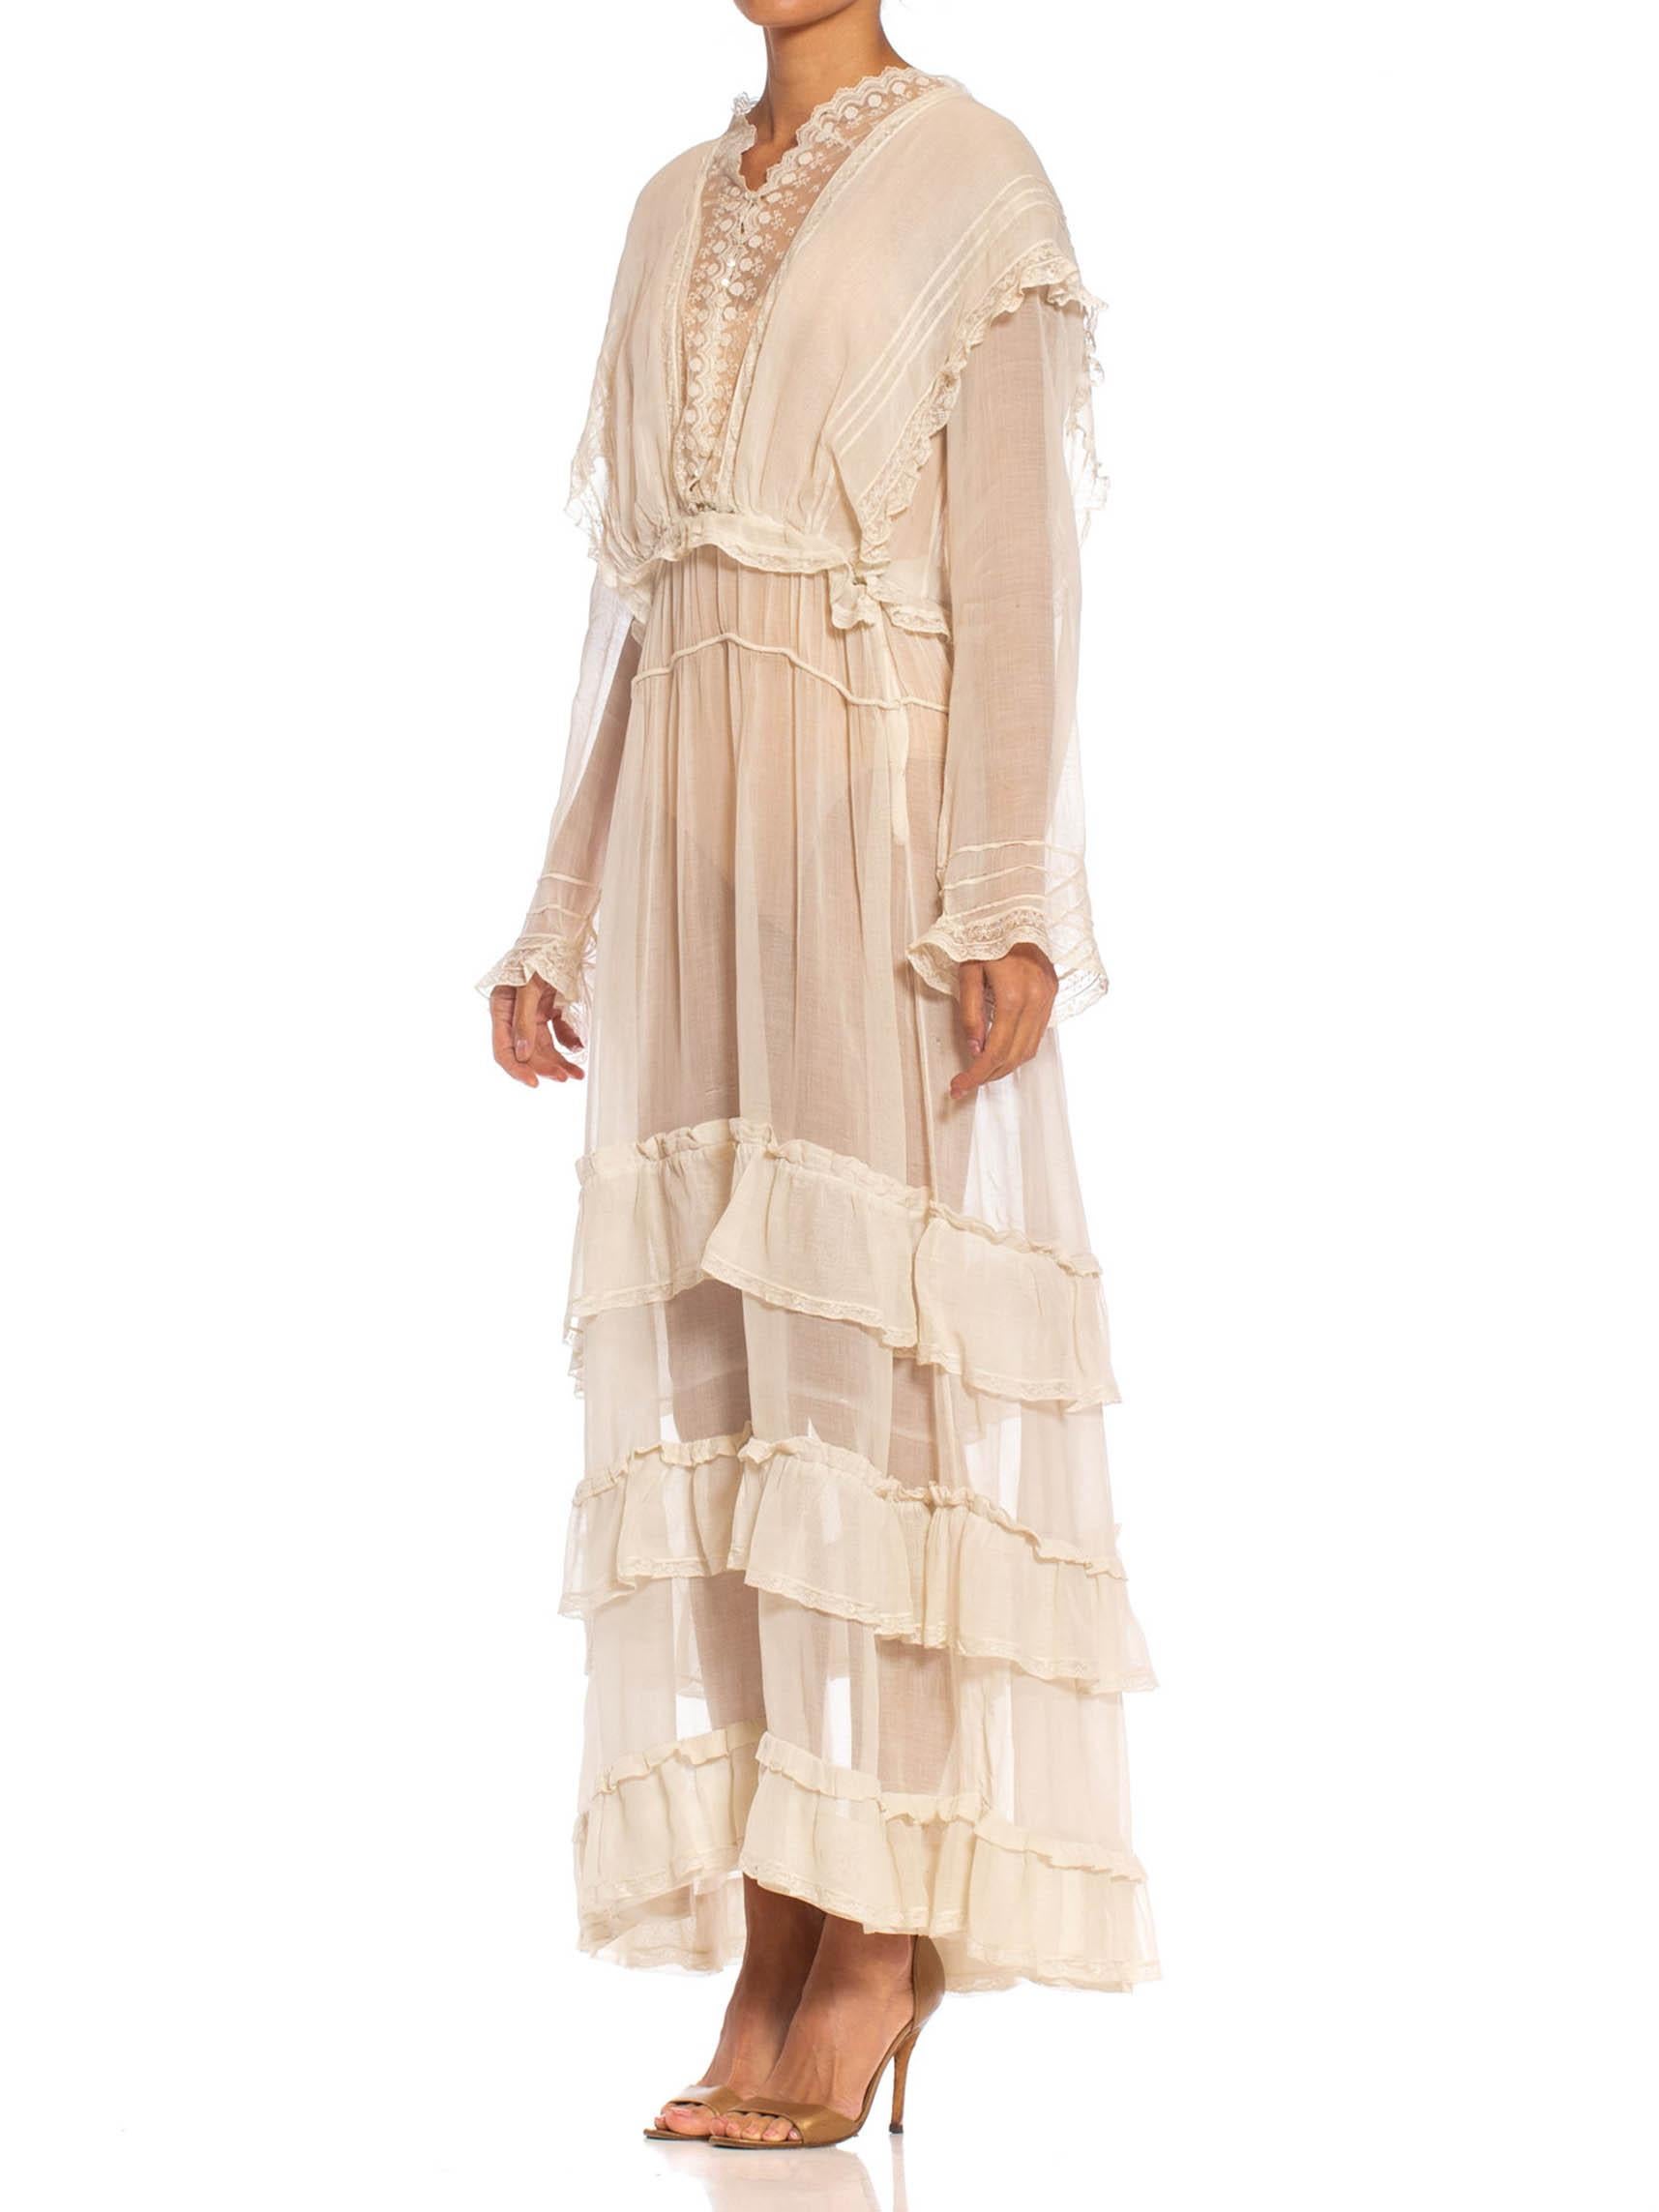 Edwardian Off White Organic Cotton Voile & Lace Long Sleeved Ruffled Tea Dress 2